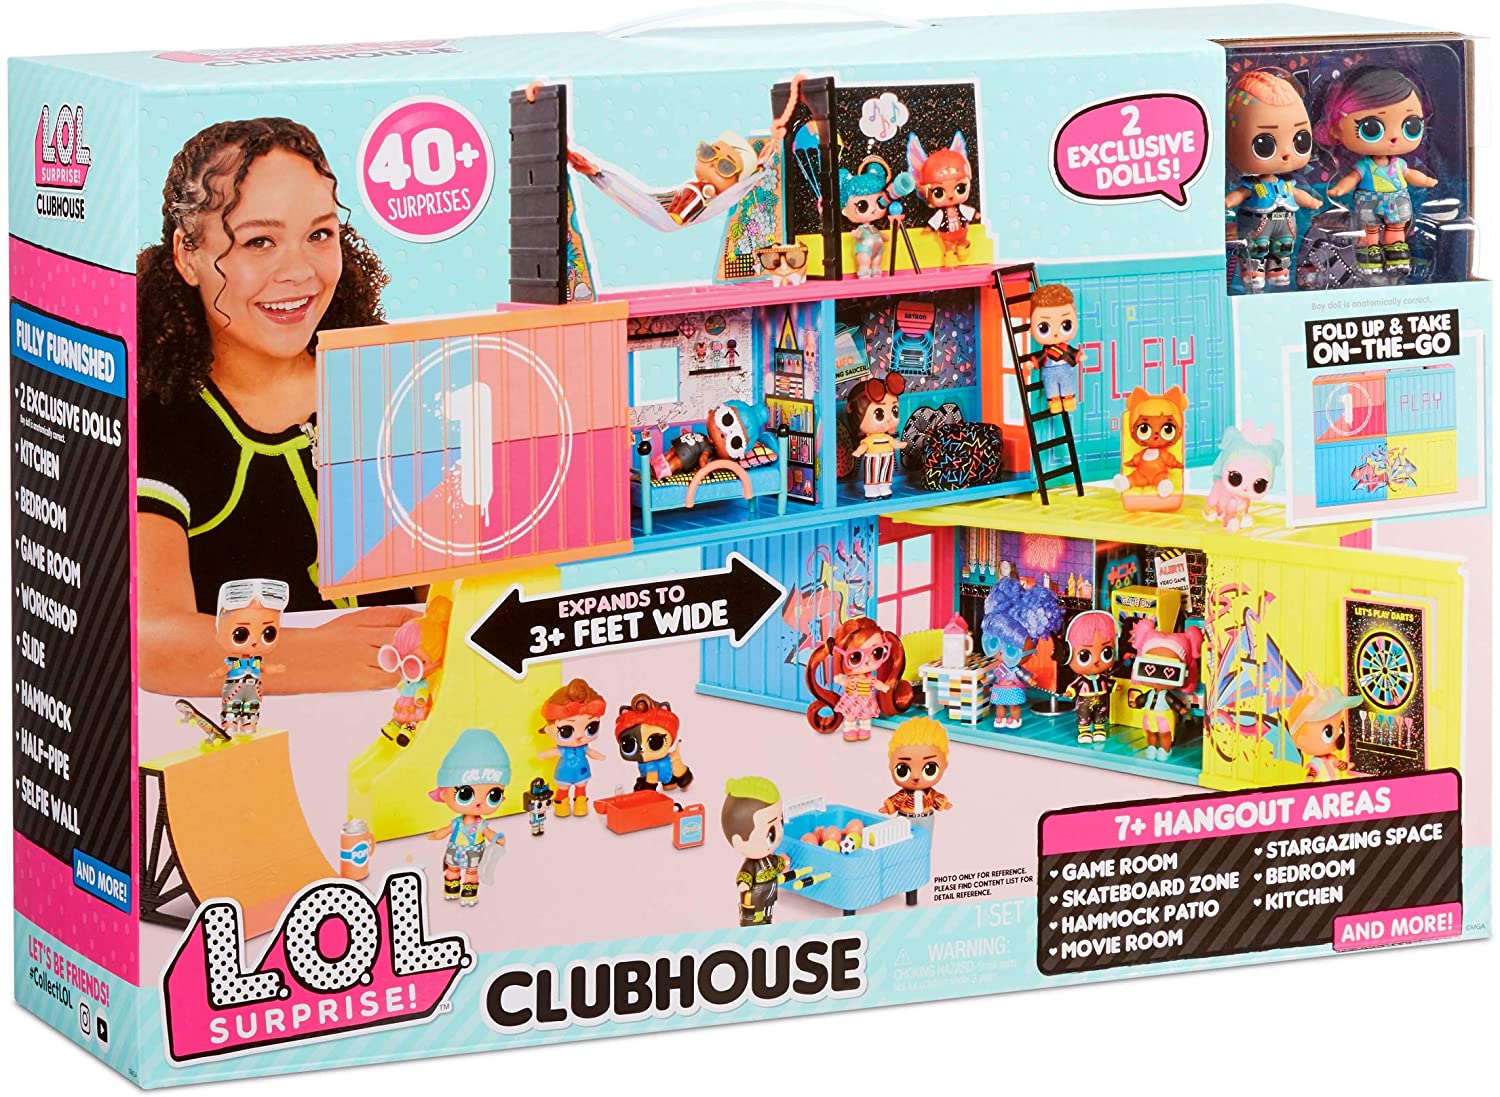 LOL Surprise Clubhouse Playset with 2 exclusive tots 2020 - YouLoveIt.com